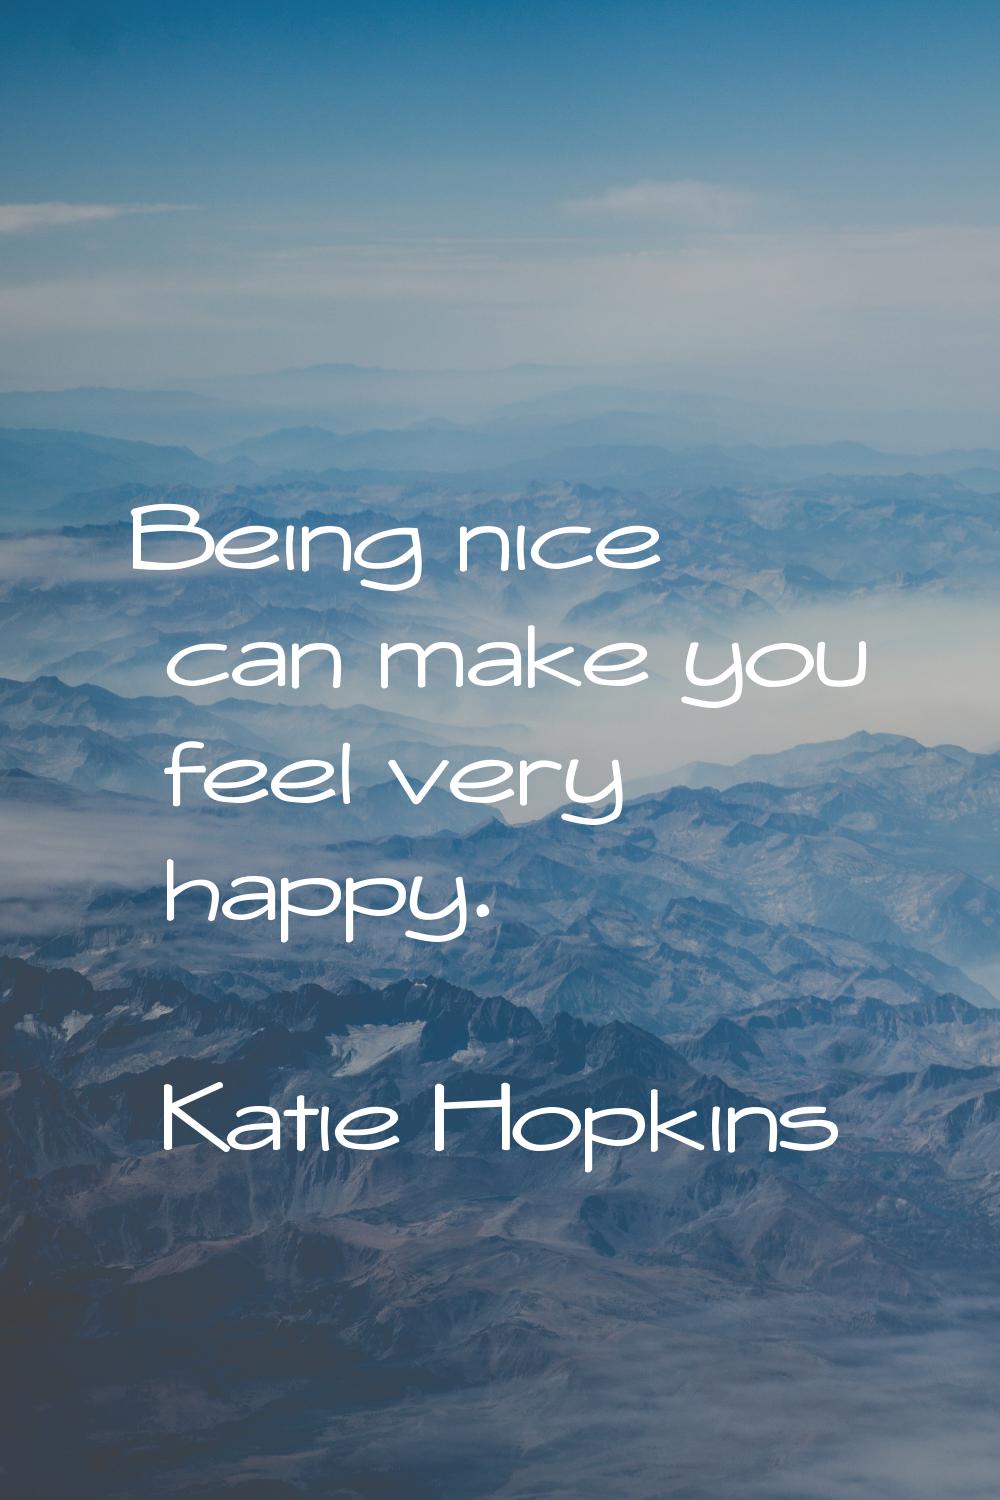 Being nice can make you feel very happy.